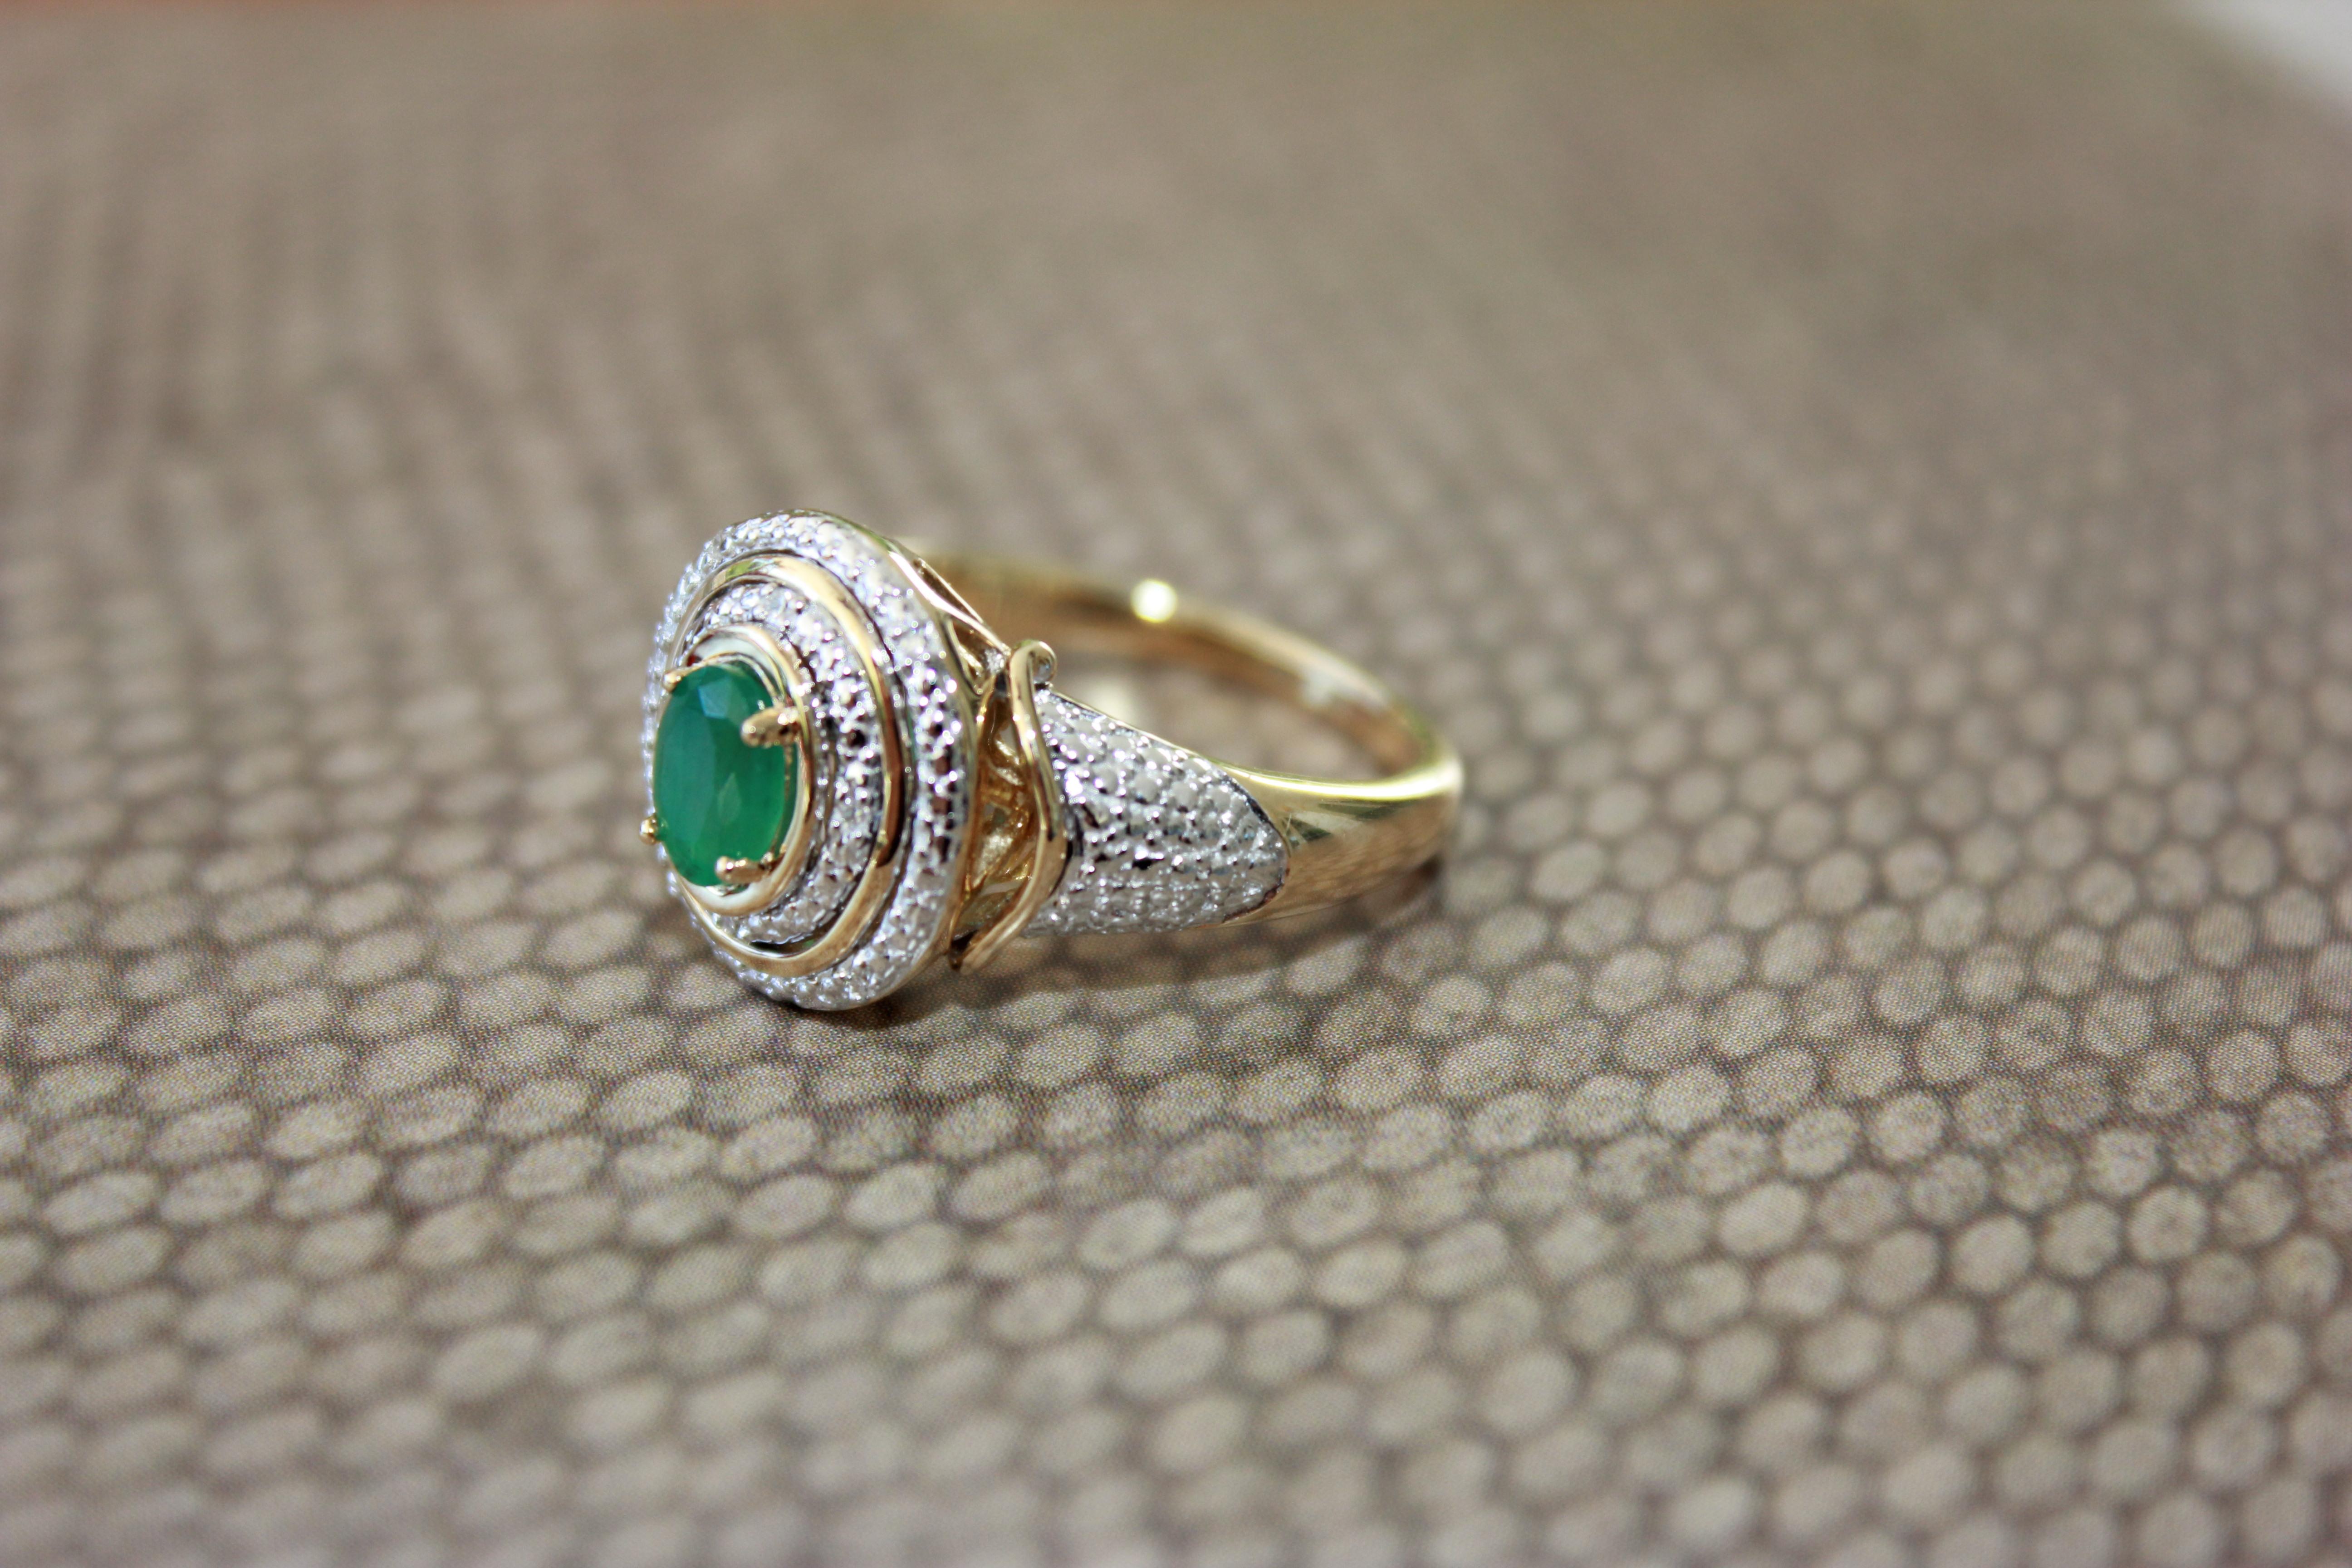 10K Yellow Gold Emerald Ring with diamonds that is perfect as a cocktail ring or an everyday piece. Turn heads with this unique ring with a vintage style.

Diamond weight: 0.03 ct total weight
Emerald size: 6 x 4
Emerald weight: 0.50 ct
